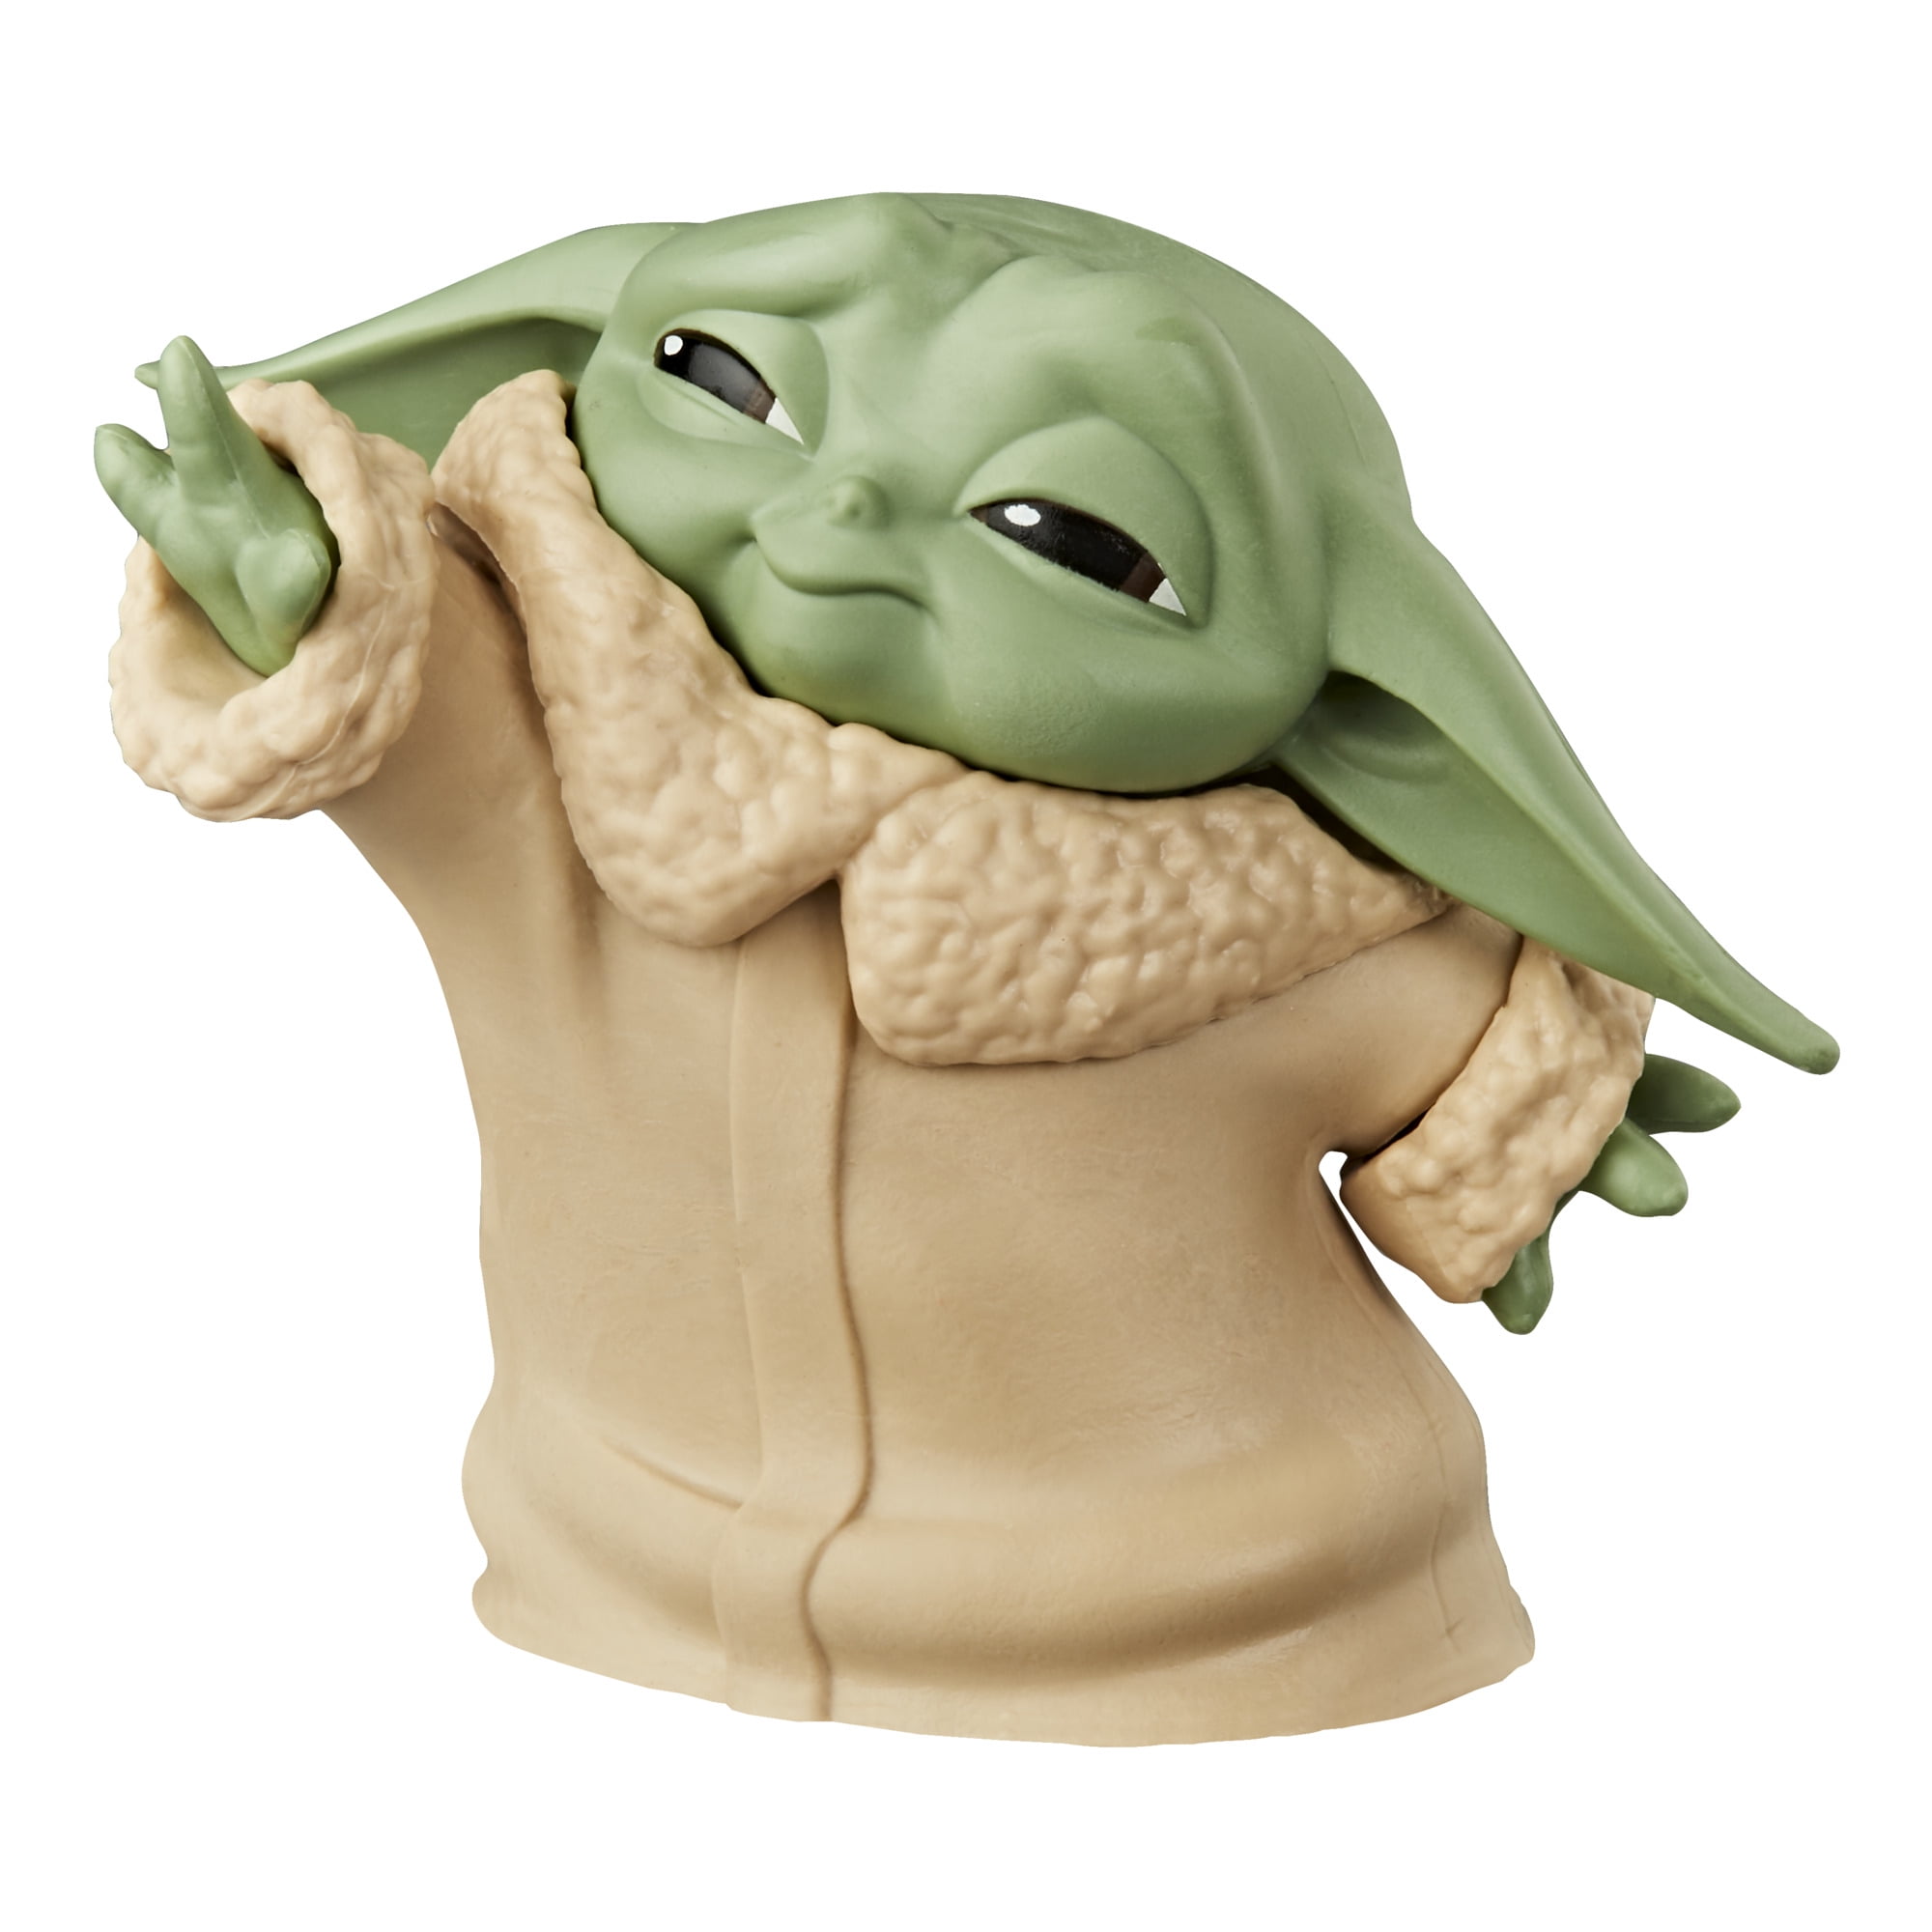 Cute Star Wars BABY YODA Toy collection Figure Model Statue Sculpture Gift 